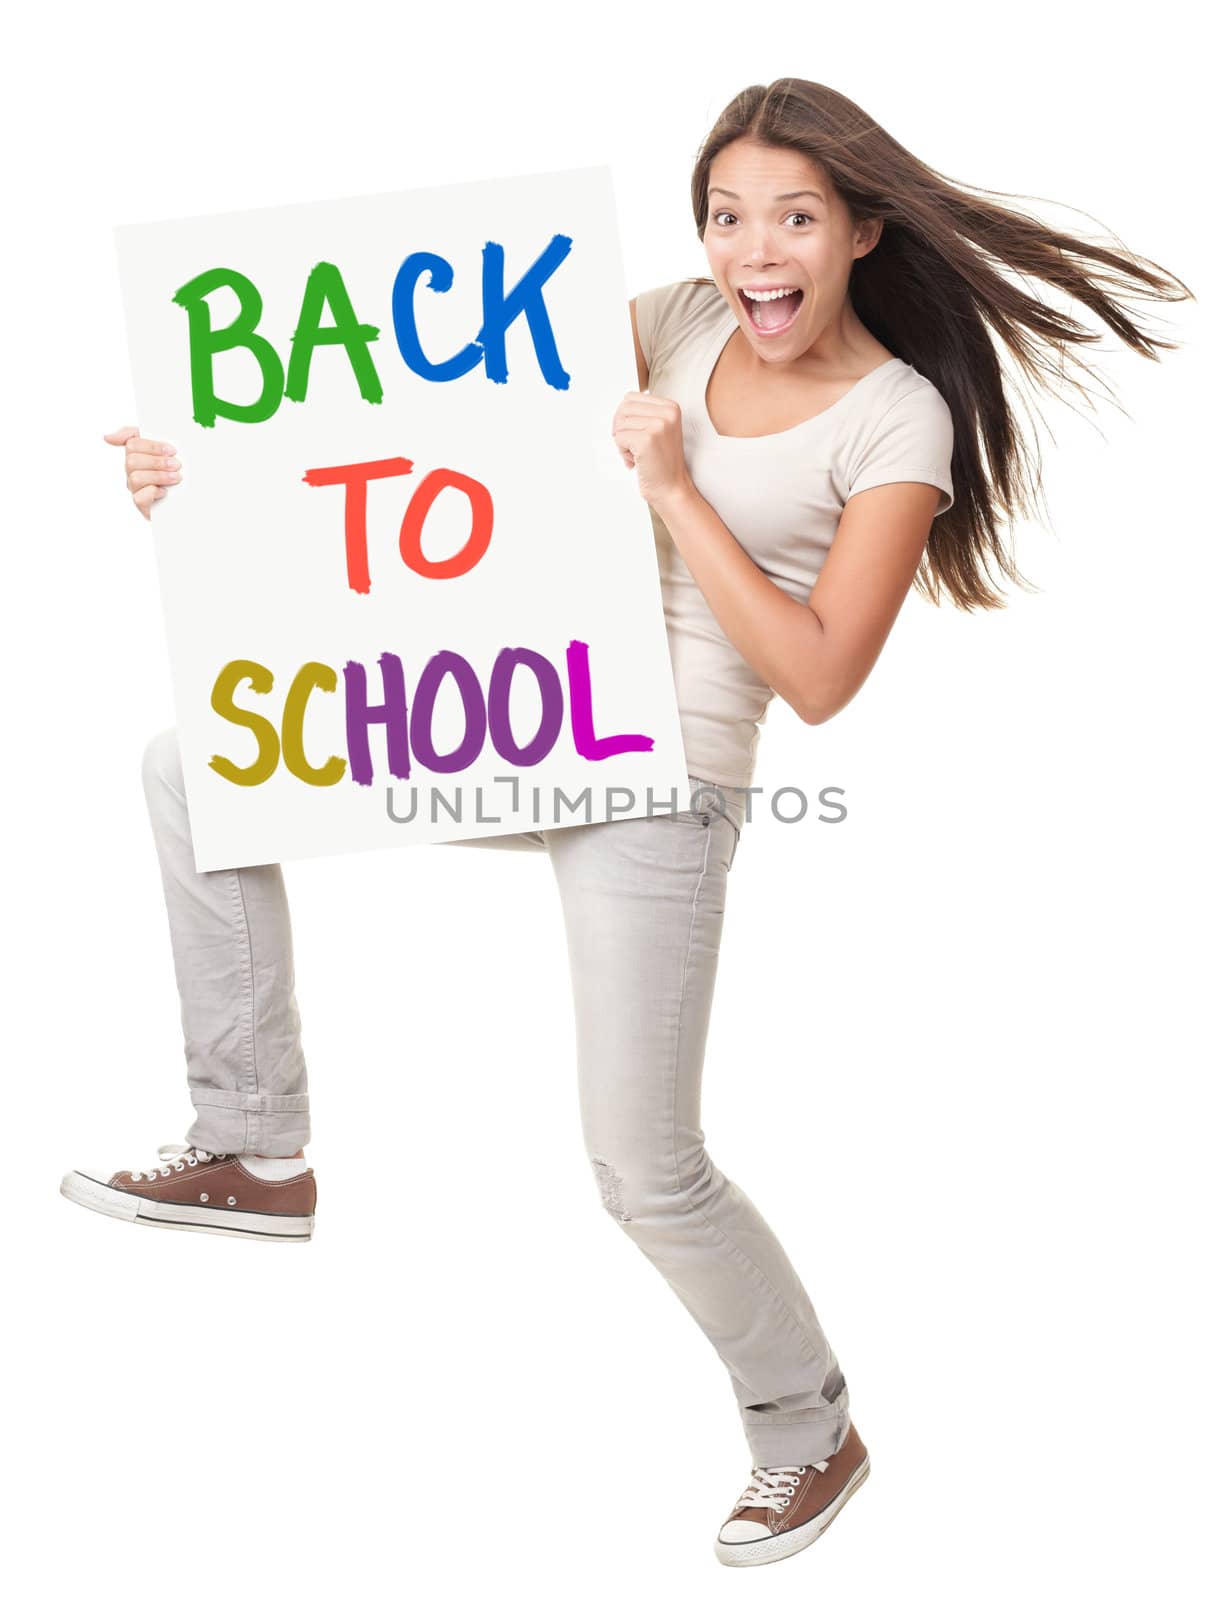 Back to school / university / college. Female student holding a sign saying Back to School. Happy excited screaming white / chinese woman isolated on white background in full length